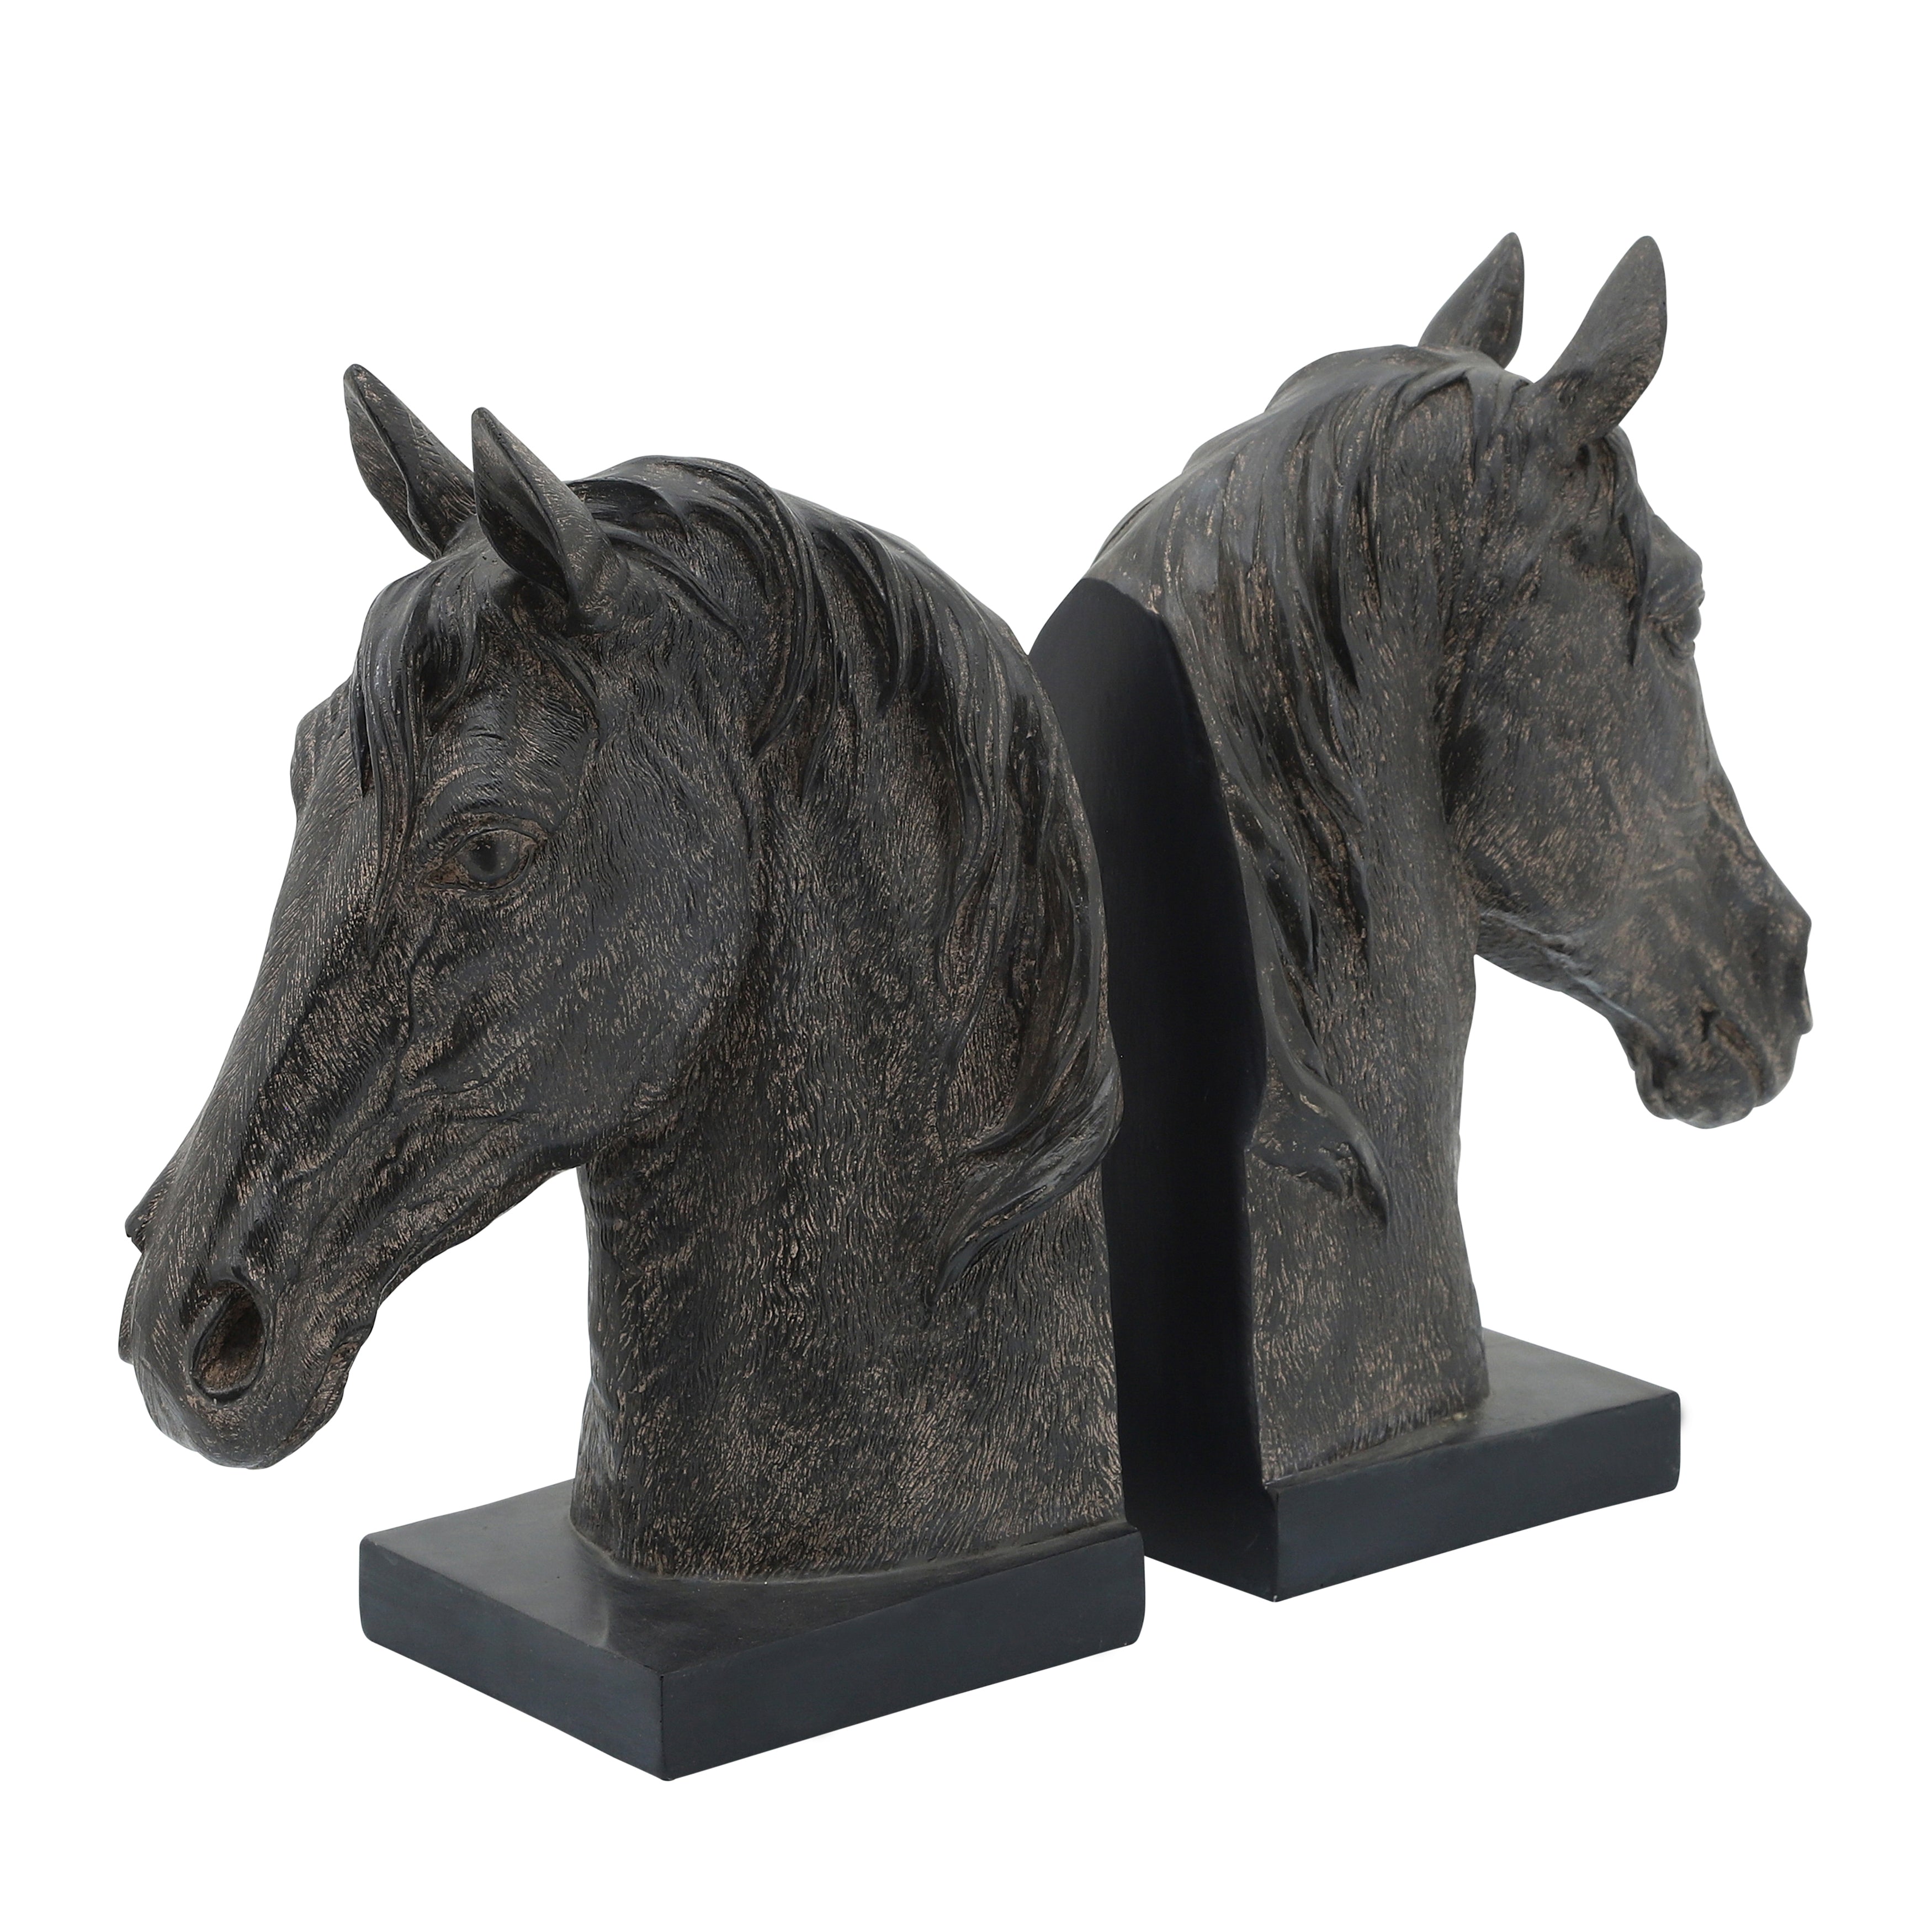 S/2 Resin 11" Horse Head Bookends, Rust